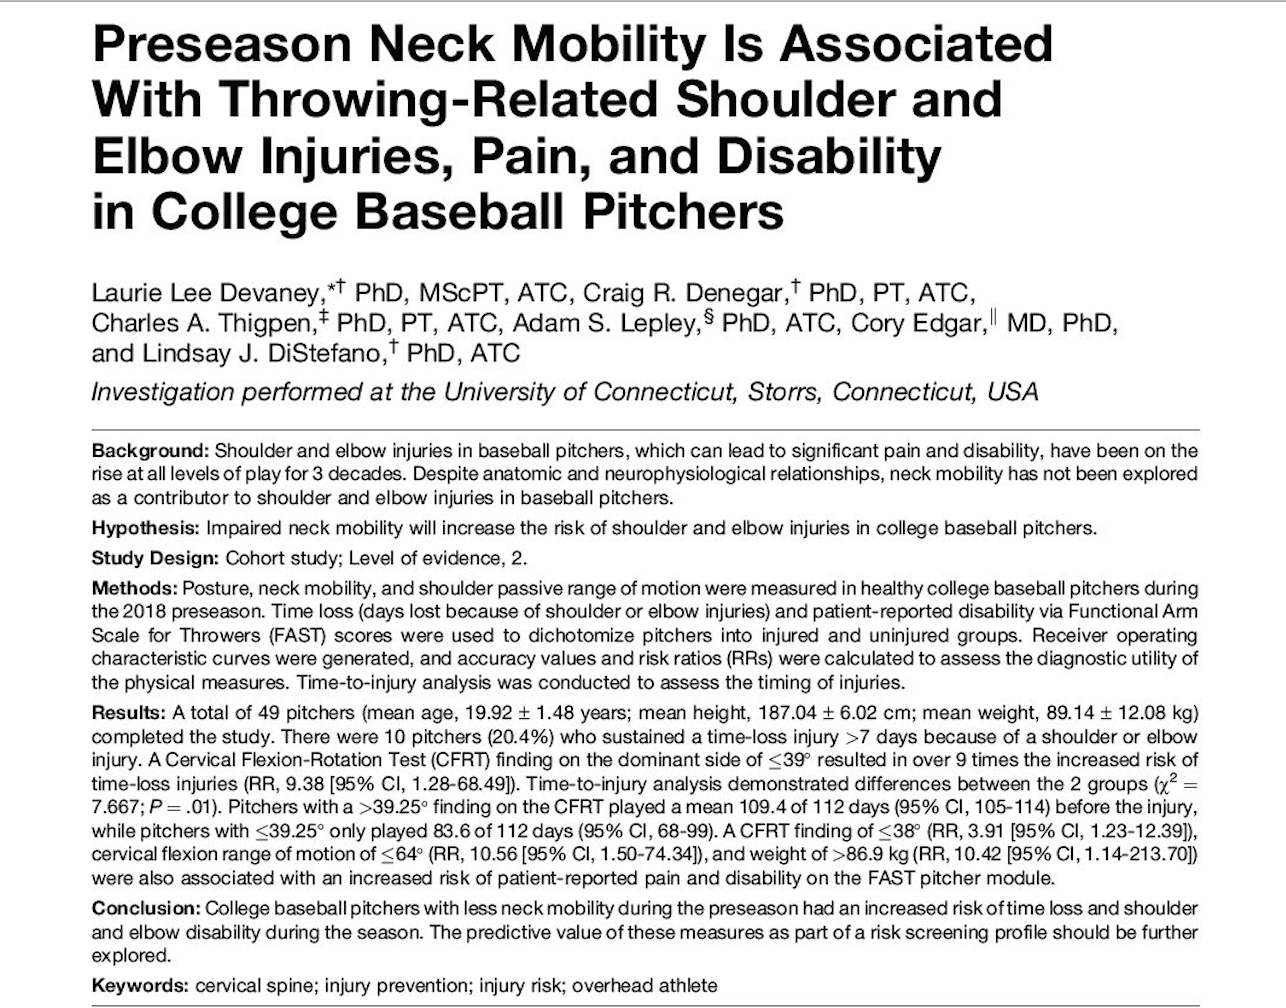 Baseball Pitcher's Neck Mobility associated with Shoulder and Elbow Injury